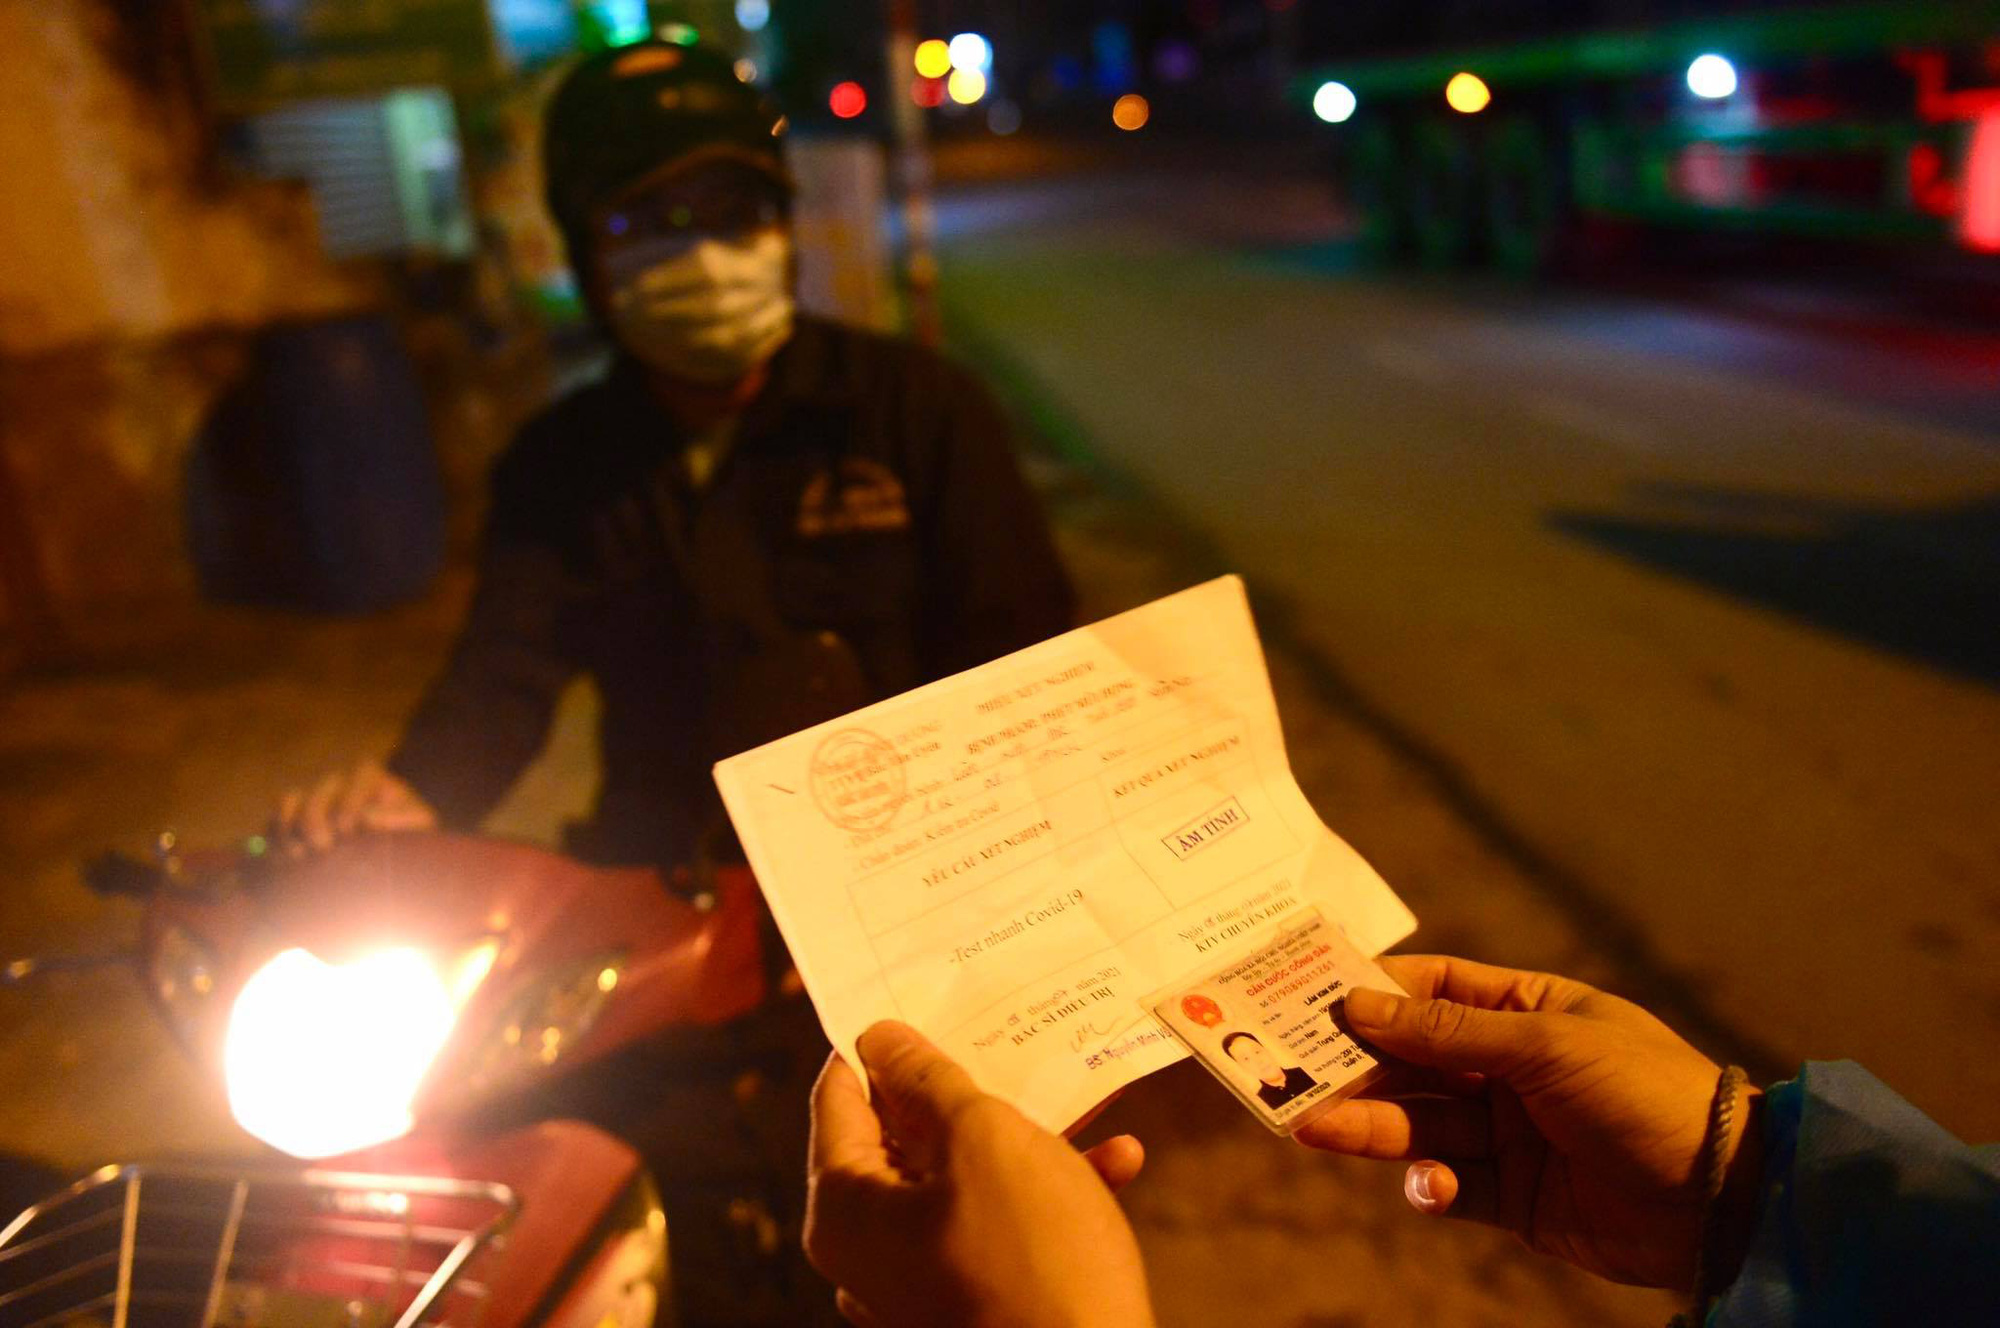 A resident presents his ID and negative COVID-19 test result at a checkpoint in Ho Chi Minh City, July 9, 2021. Photo: Quang Dinh / Tuoi Tre